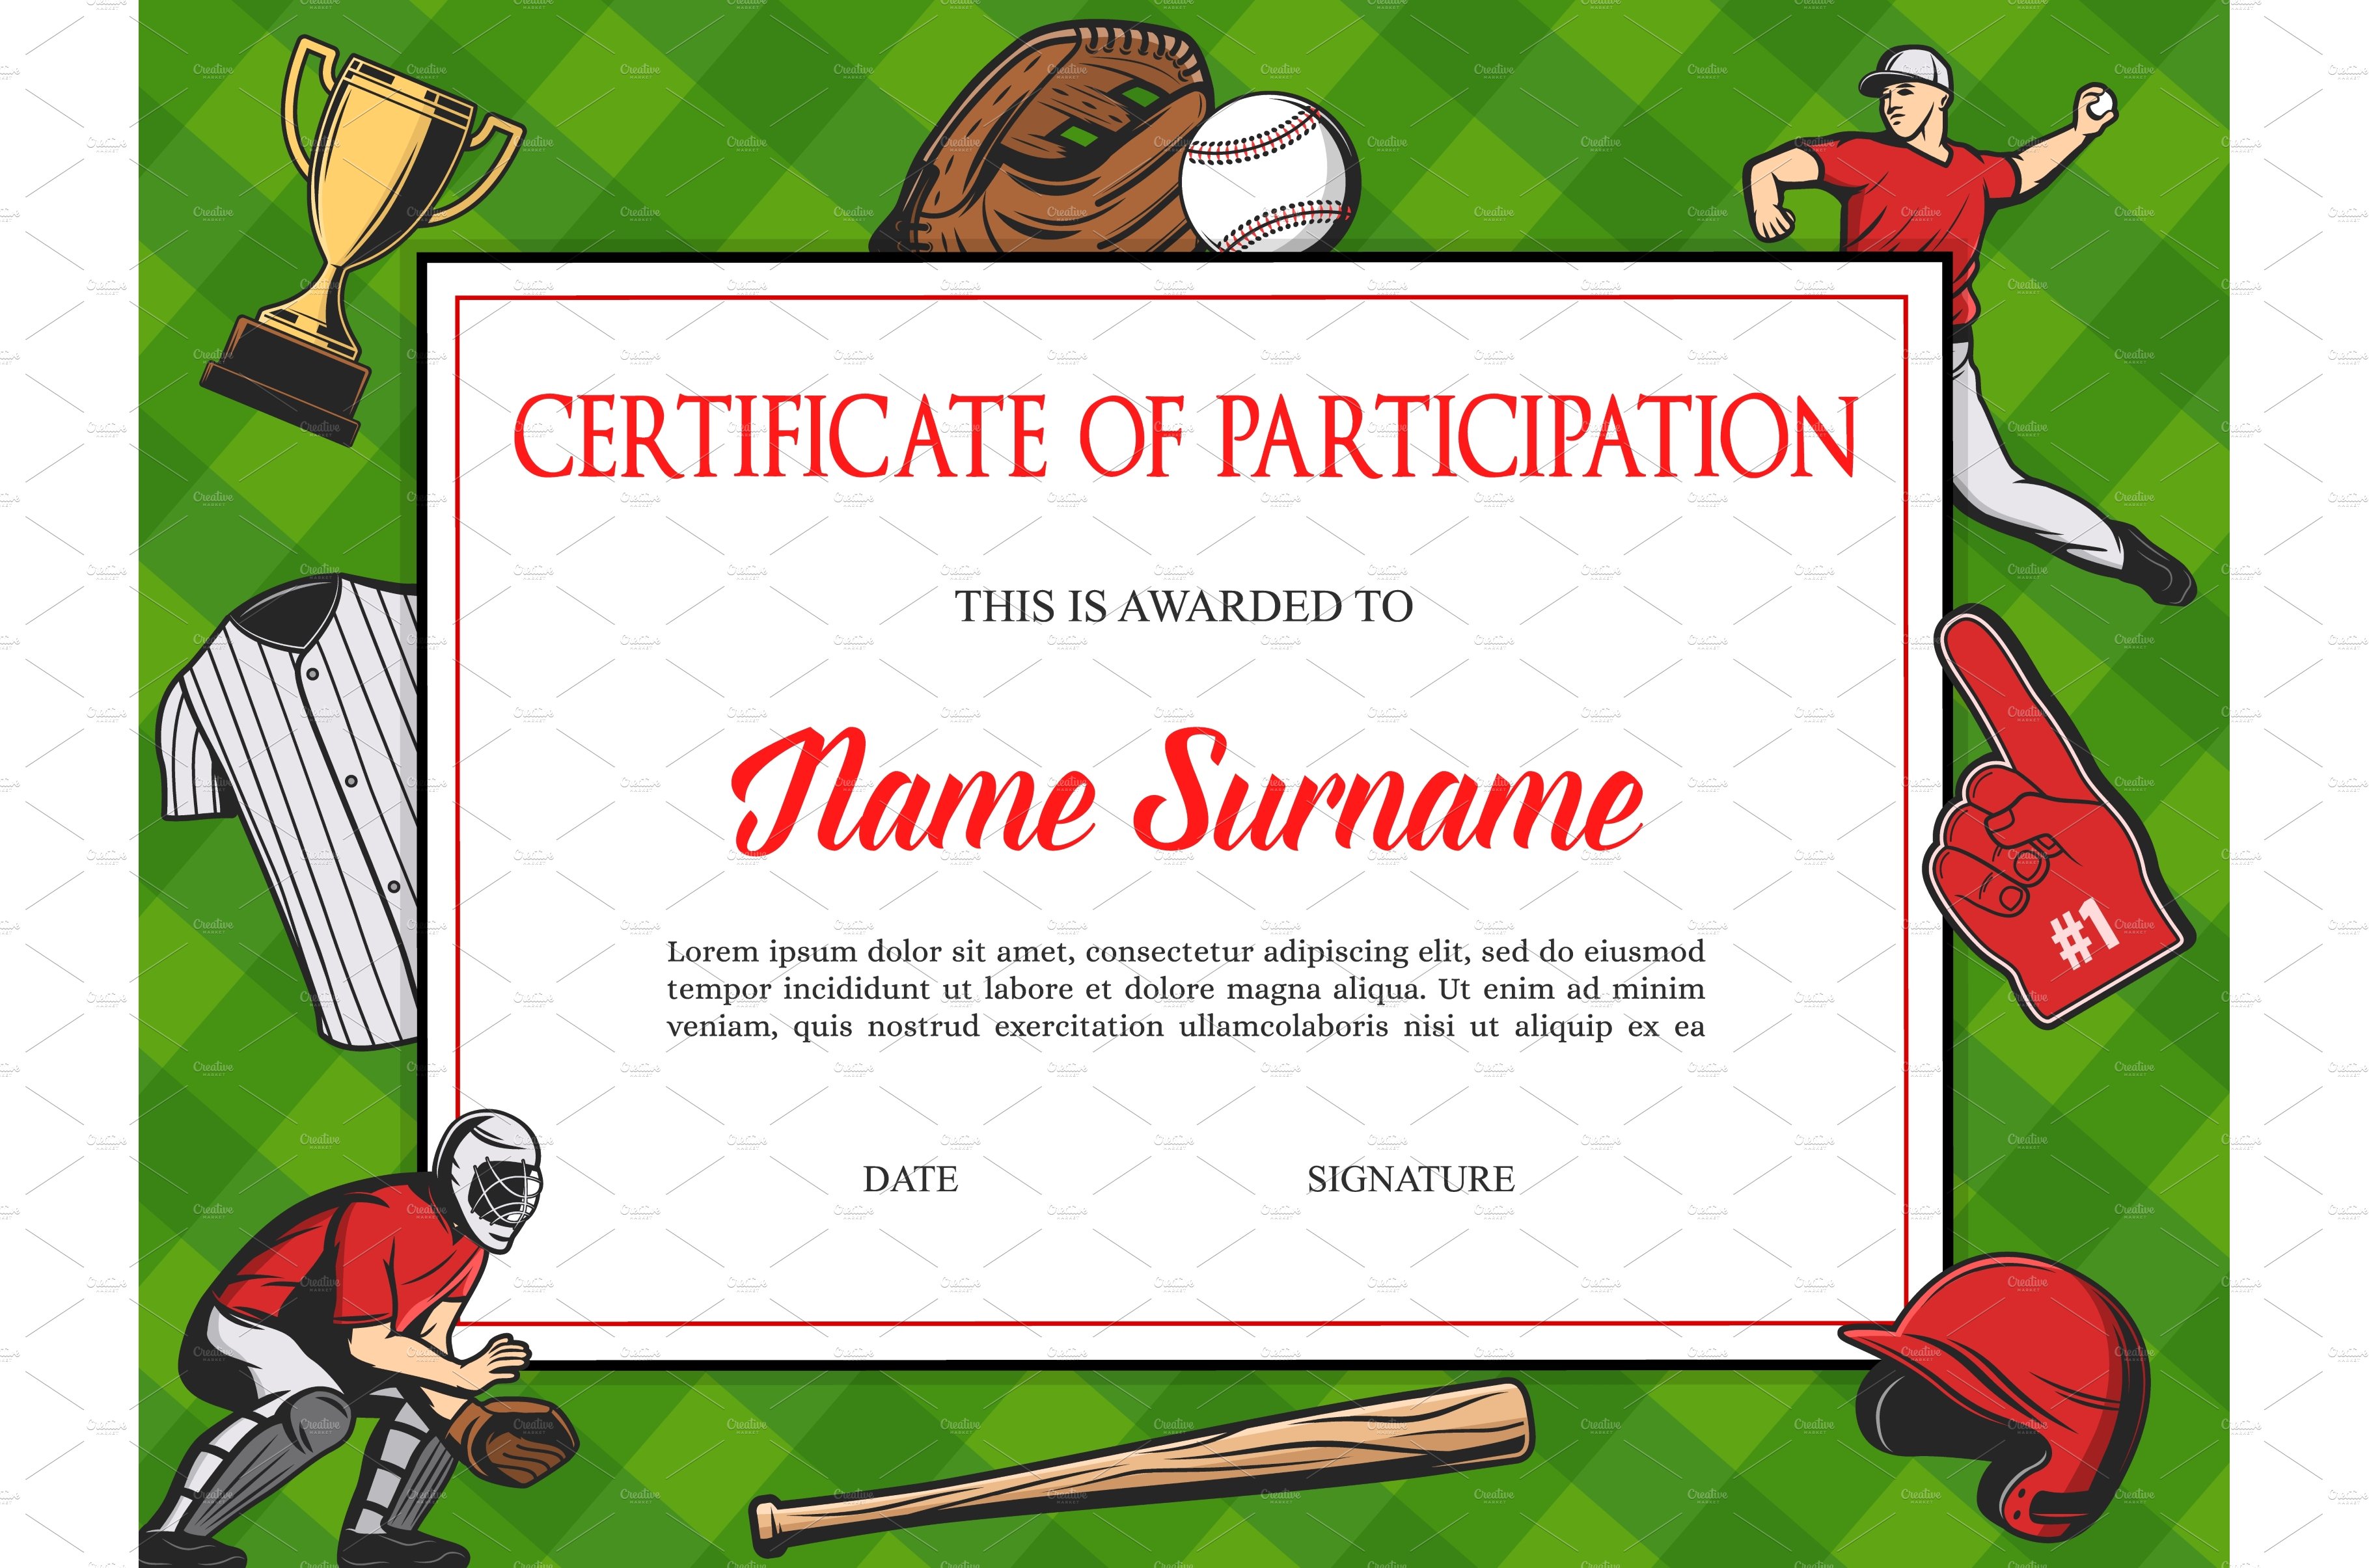 Certificate participation baseball cover image.